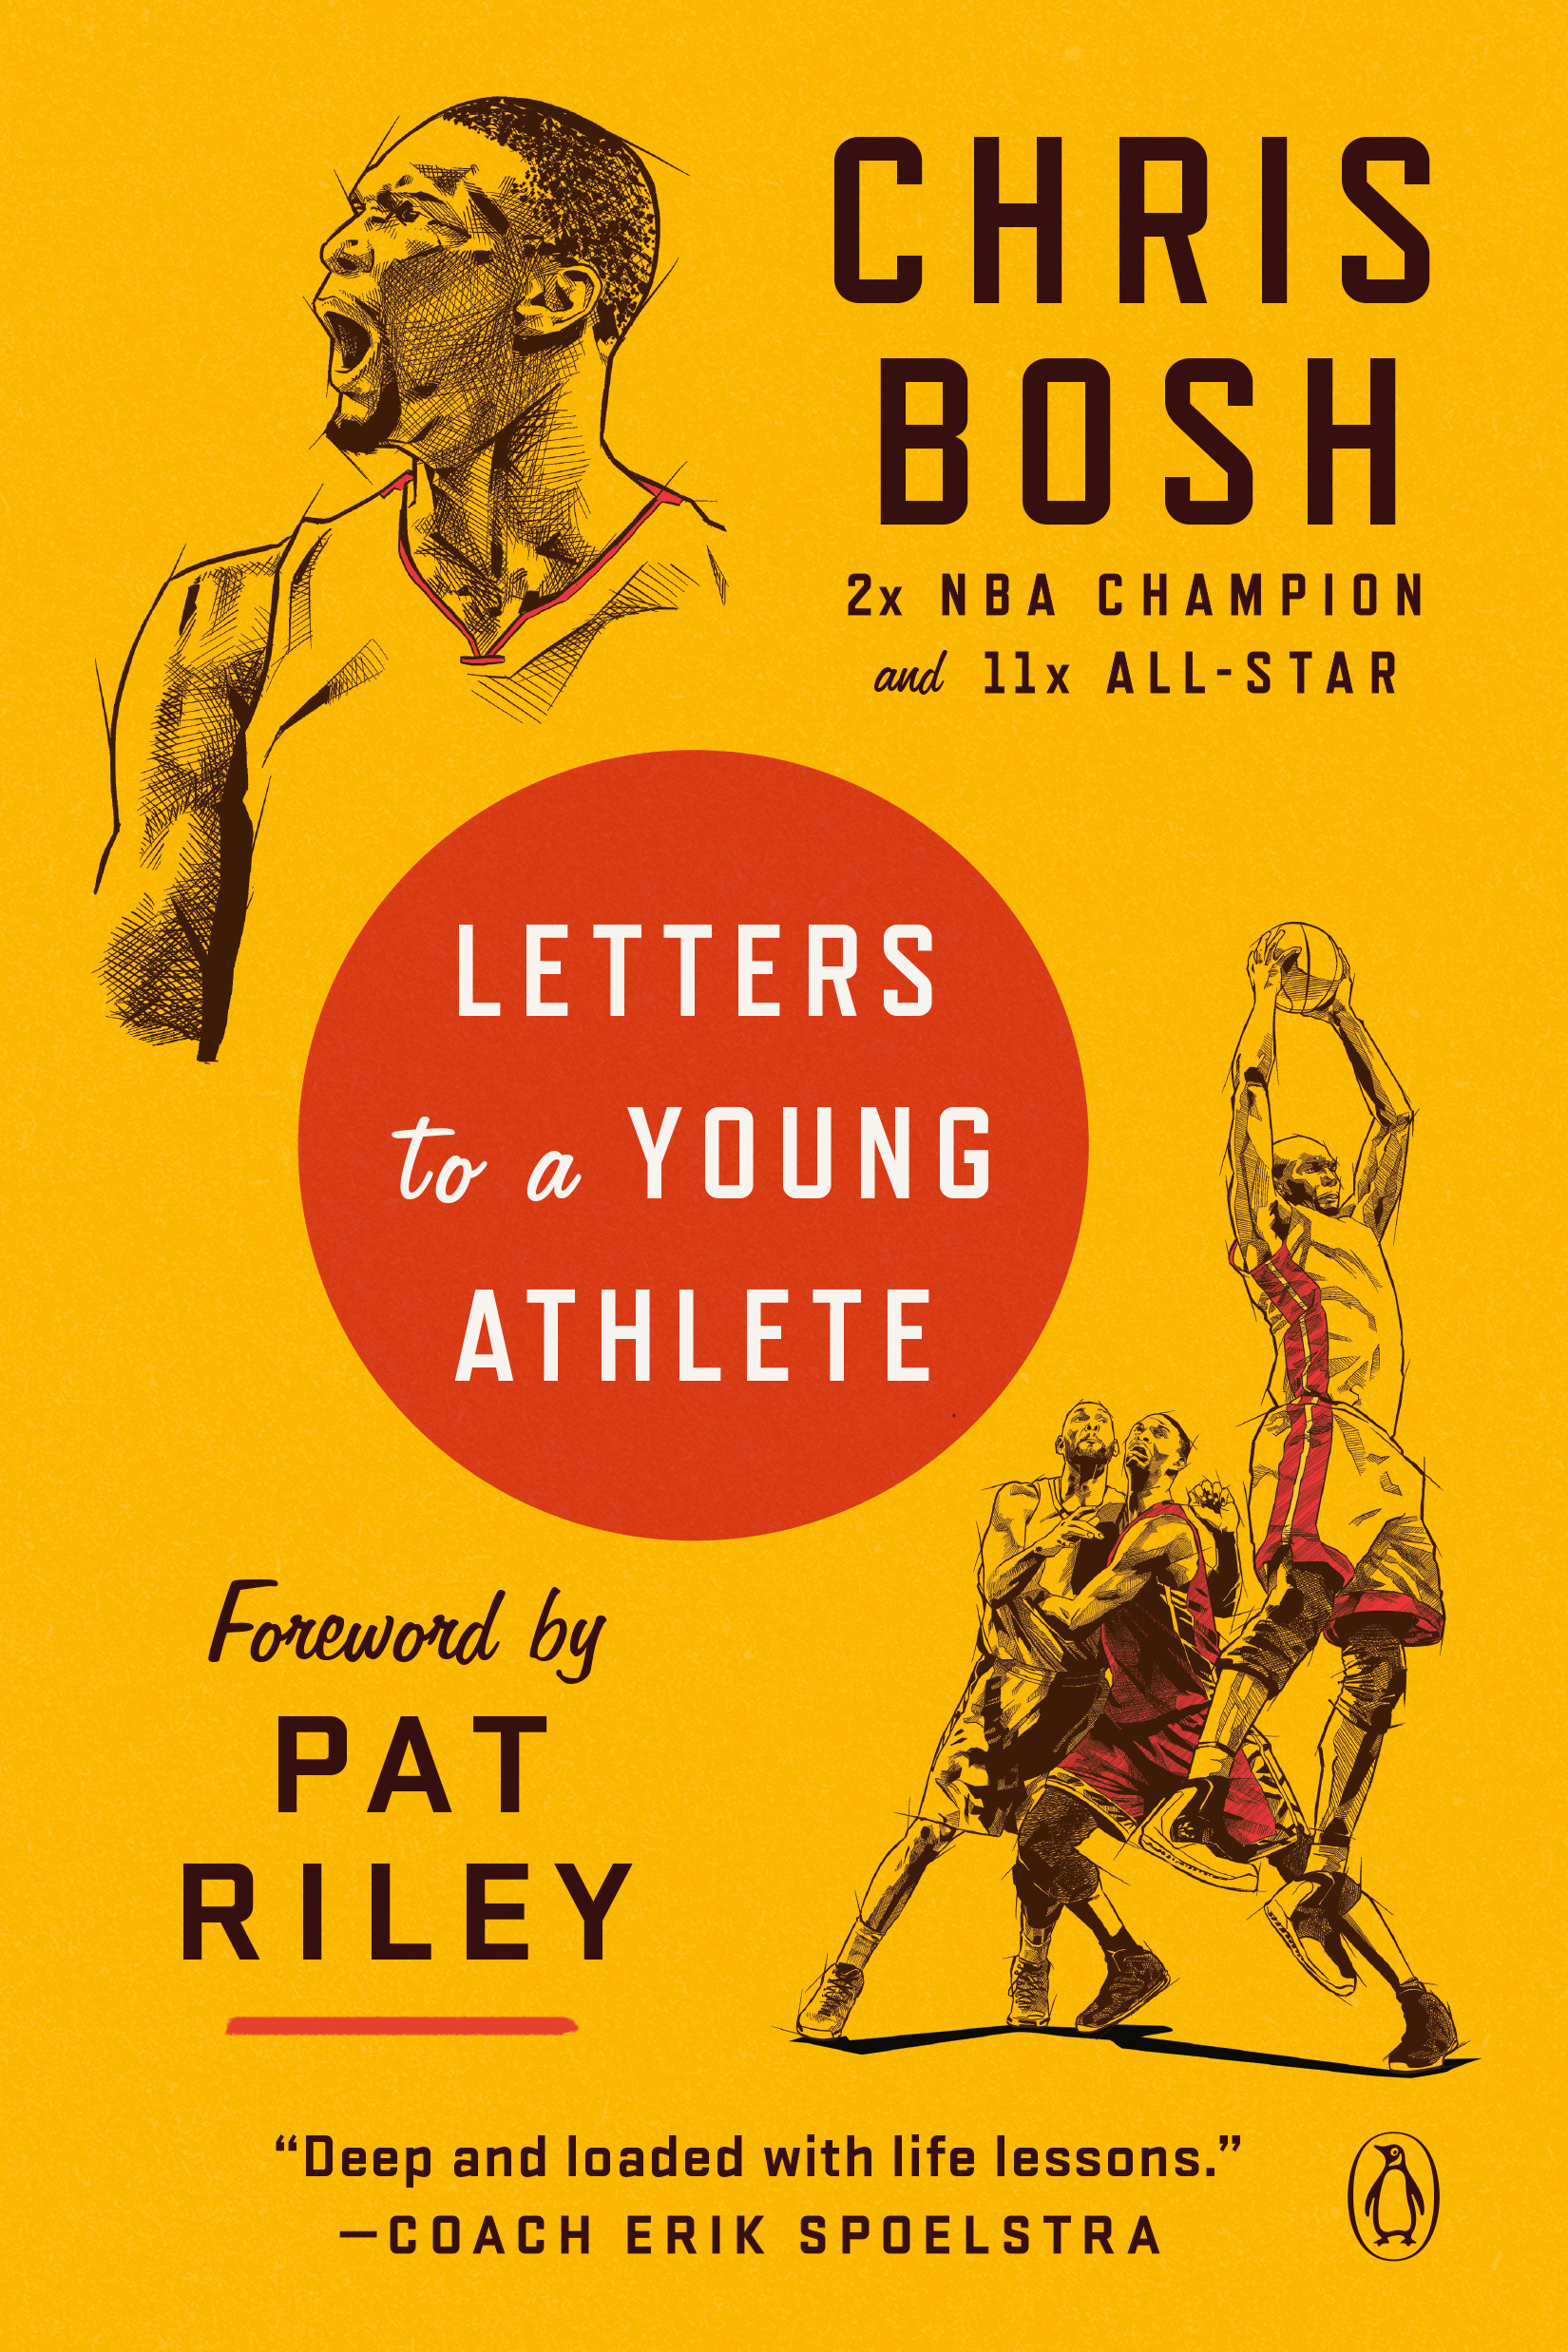 Letters to a Young Athlete | Bosh, Chris